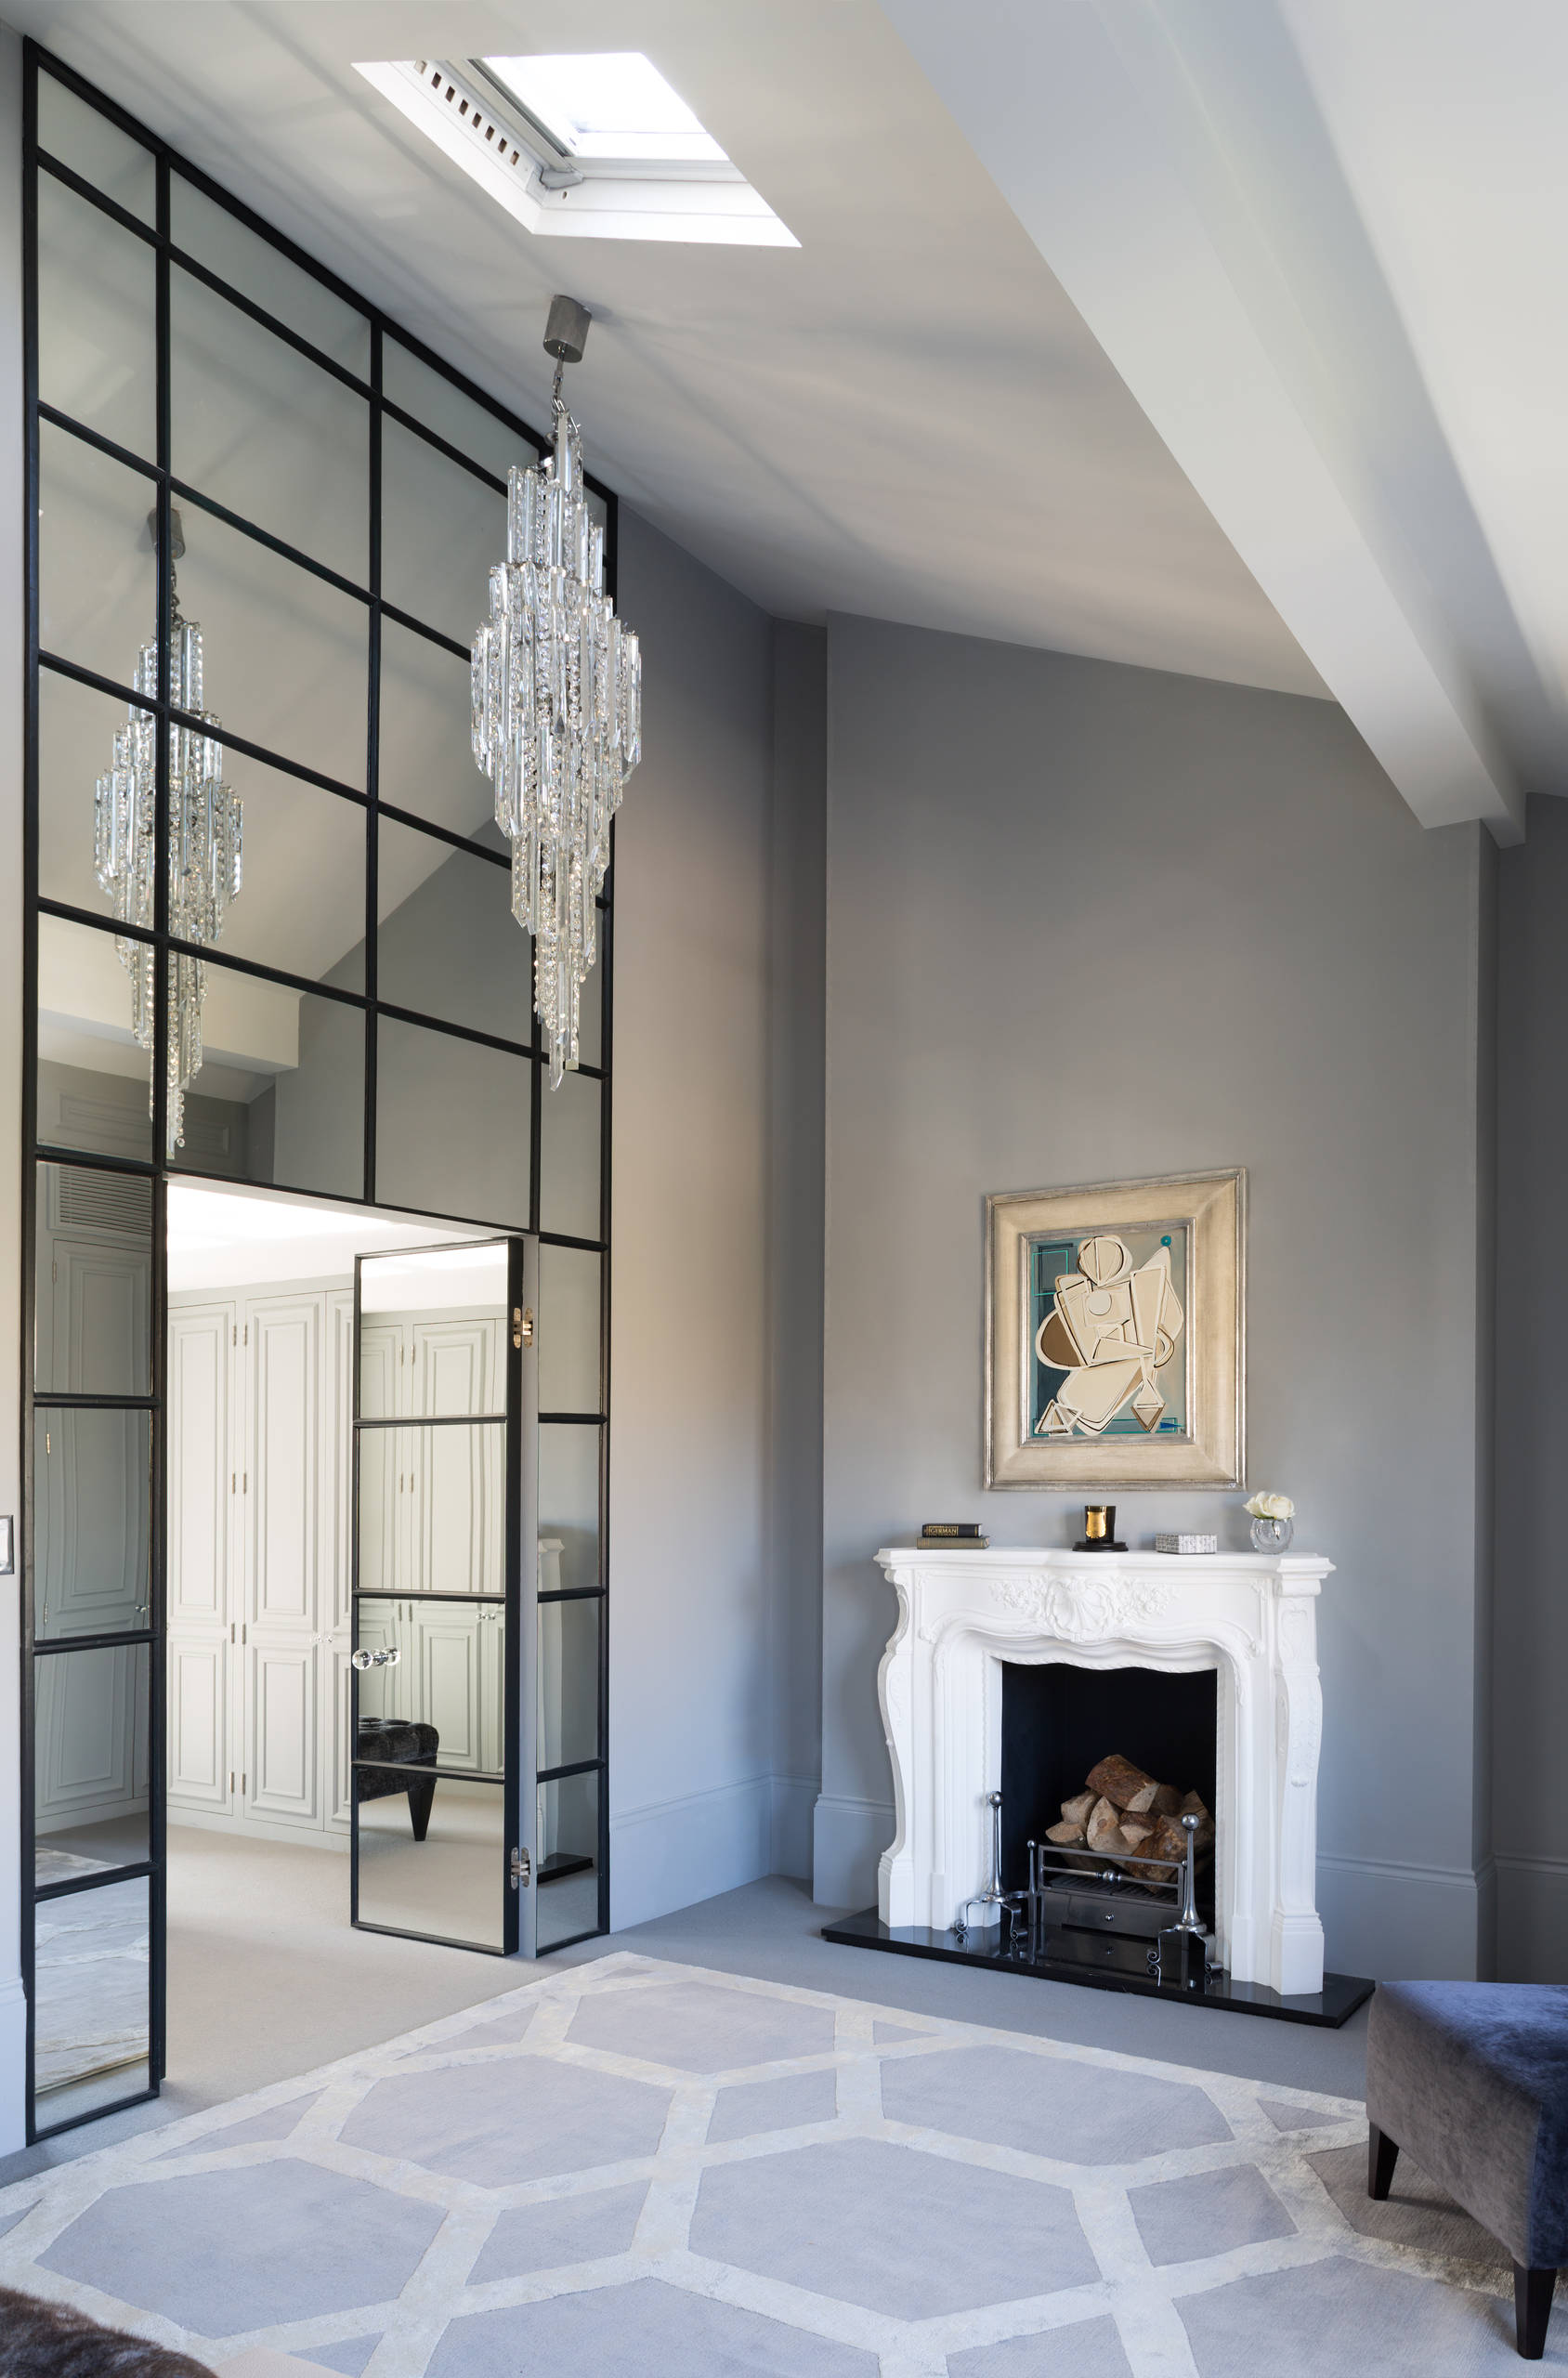 10 Cool Ways With Mirrored Walls Houzz Uk, How Much To Mirror A Whole Wall